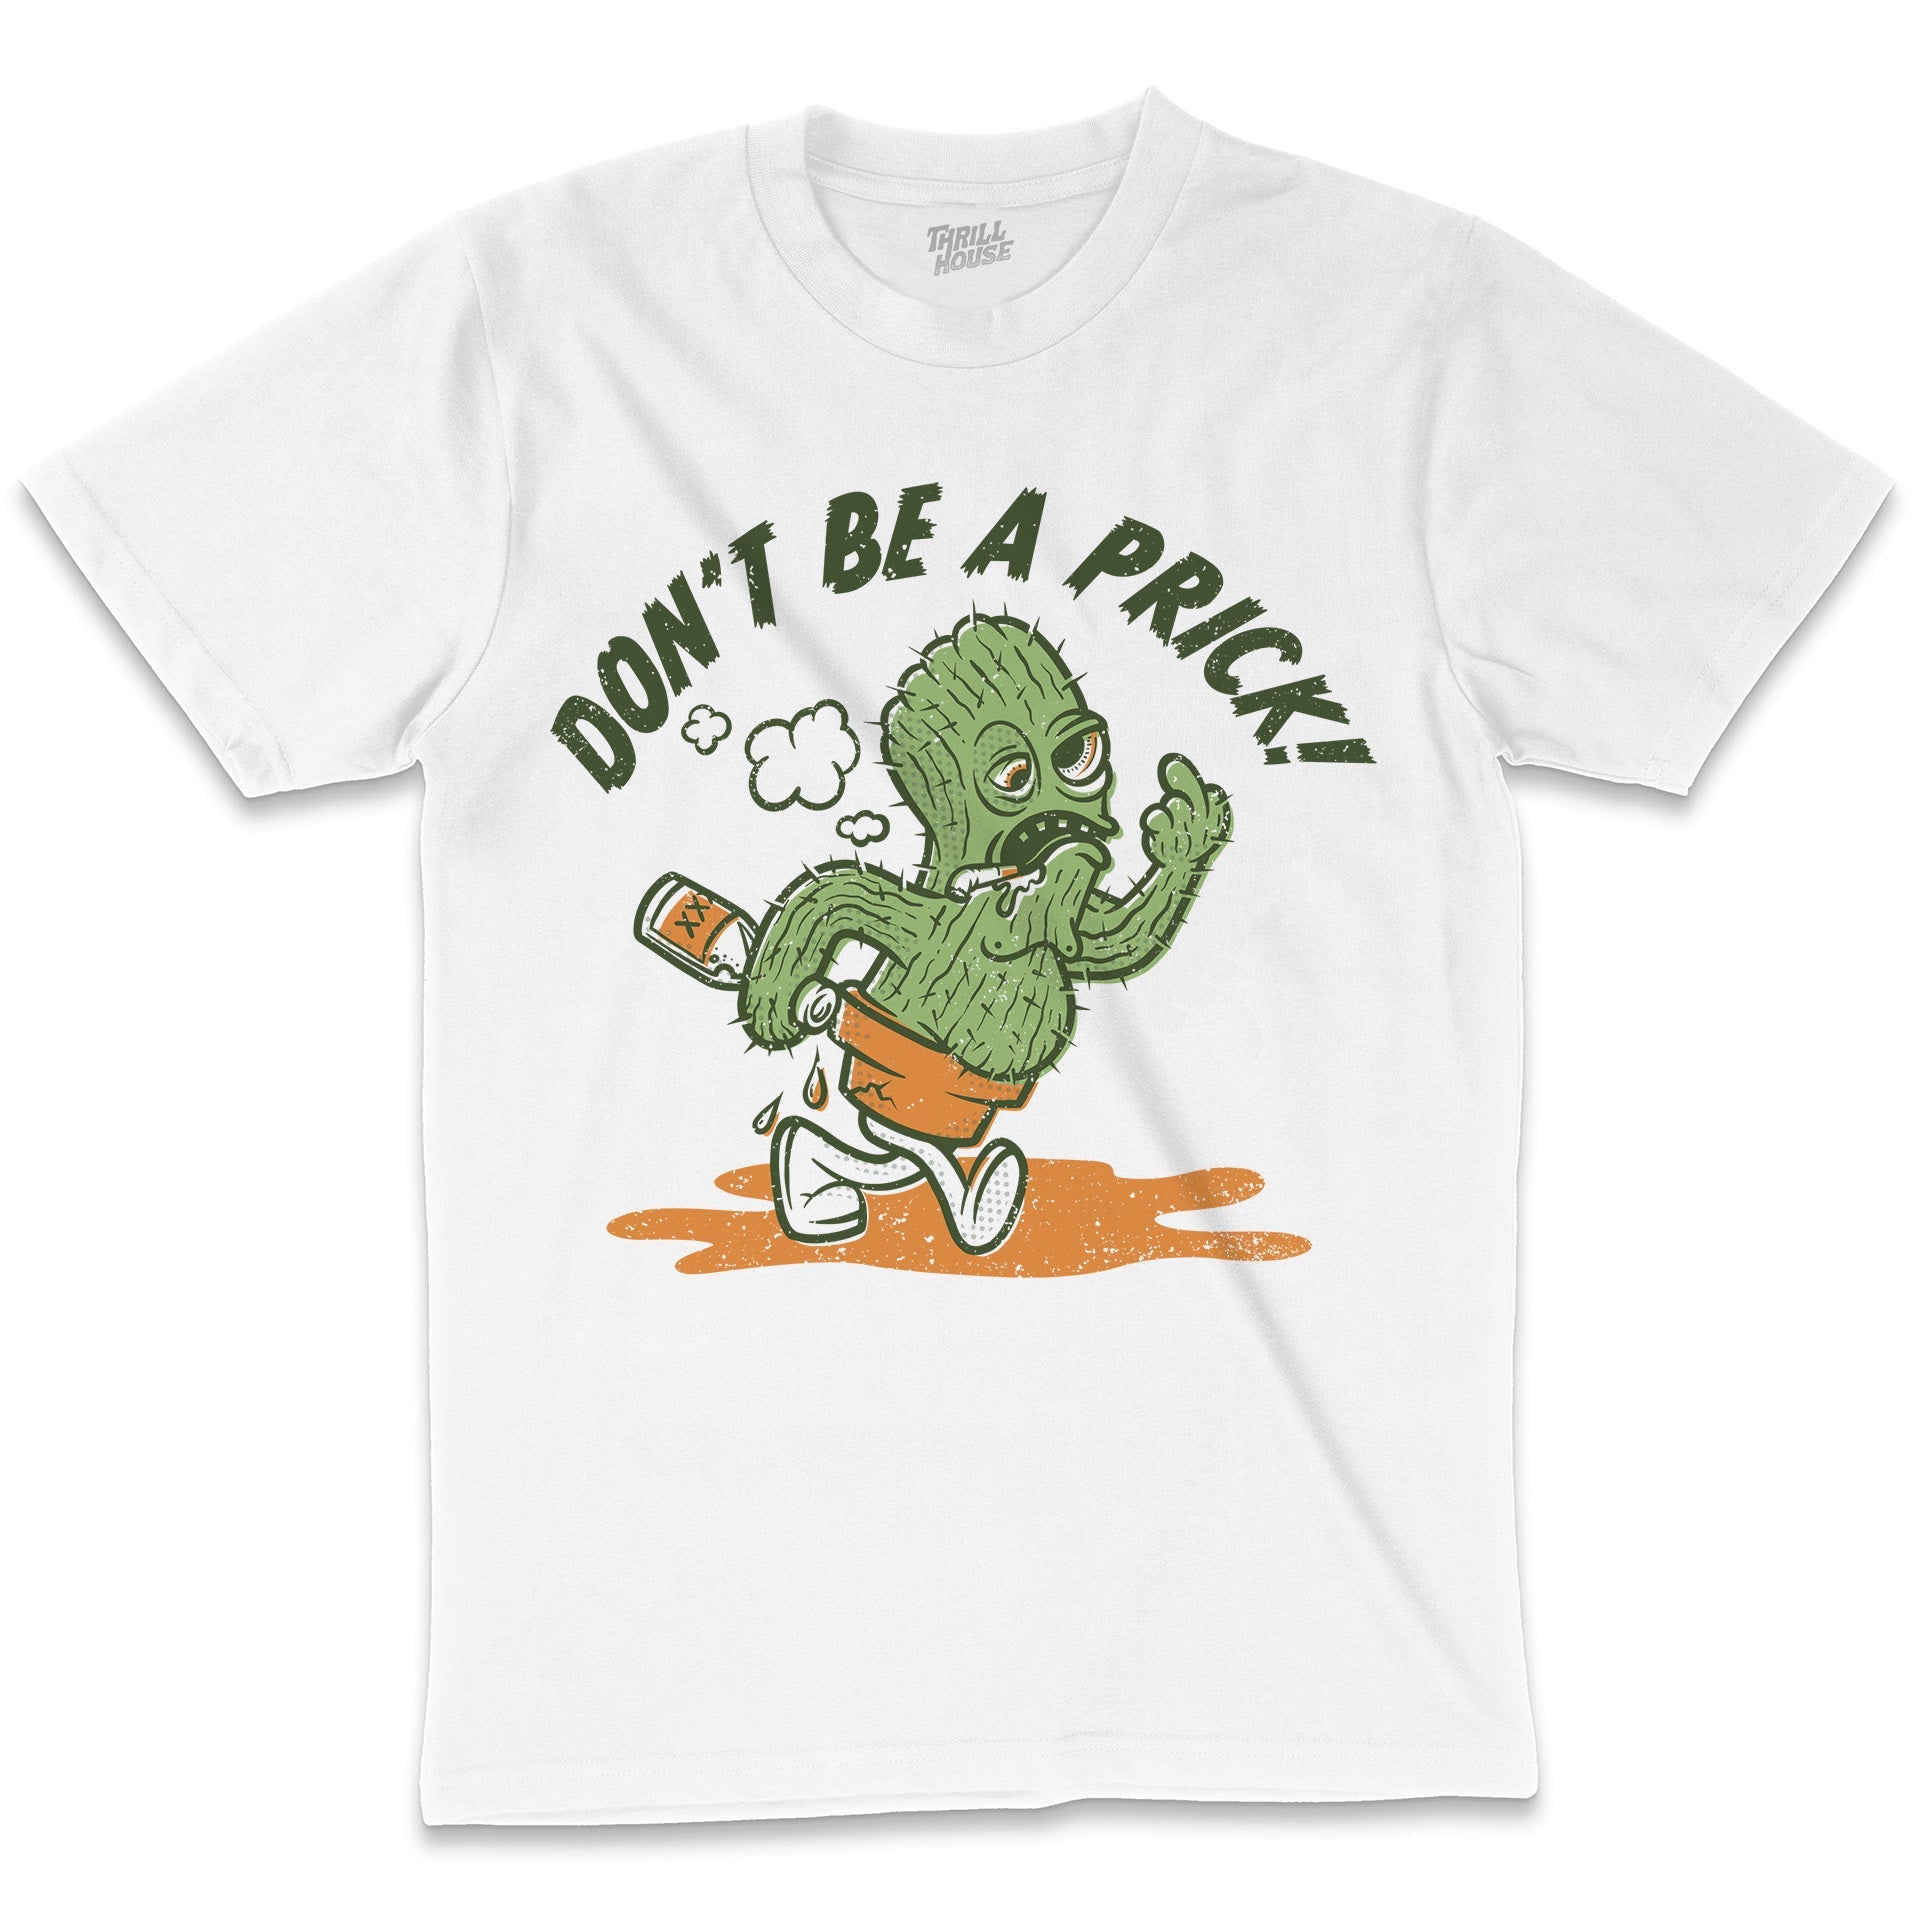 Don't Be a Prick Funny Rude Drunk Cactus Slogan Novelty Beer Alcohol Cotton T-Shirt